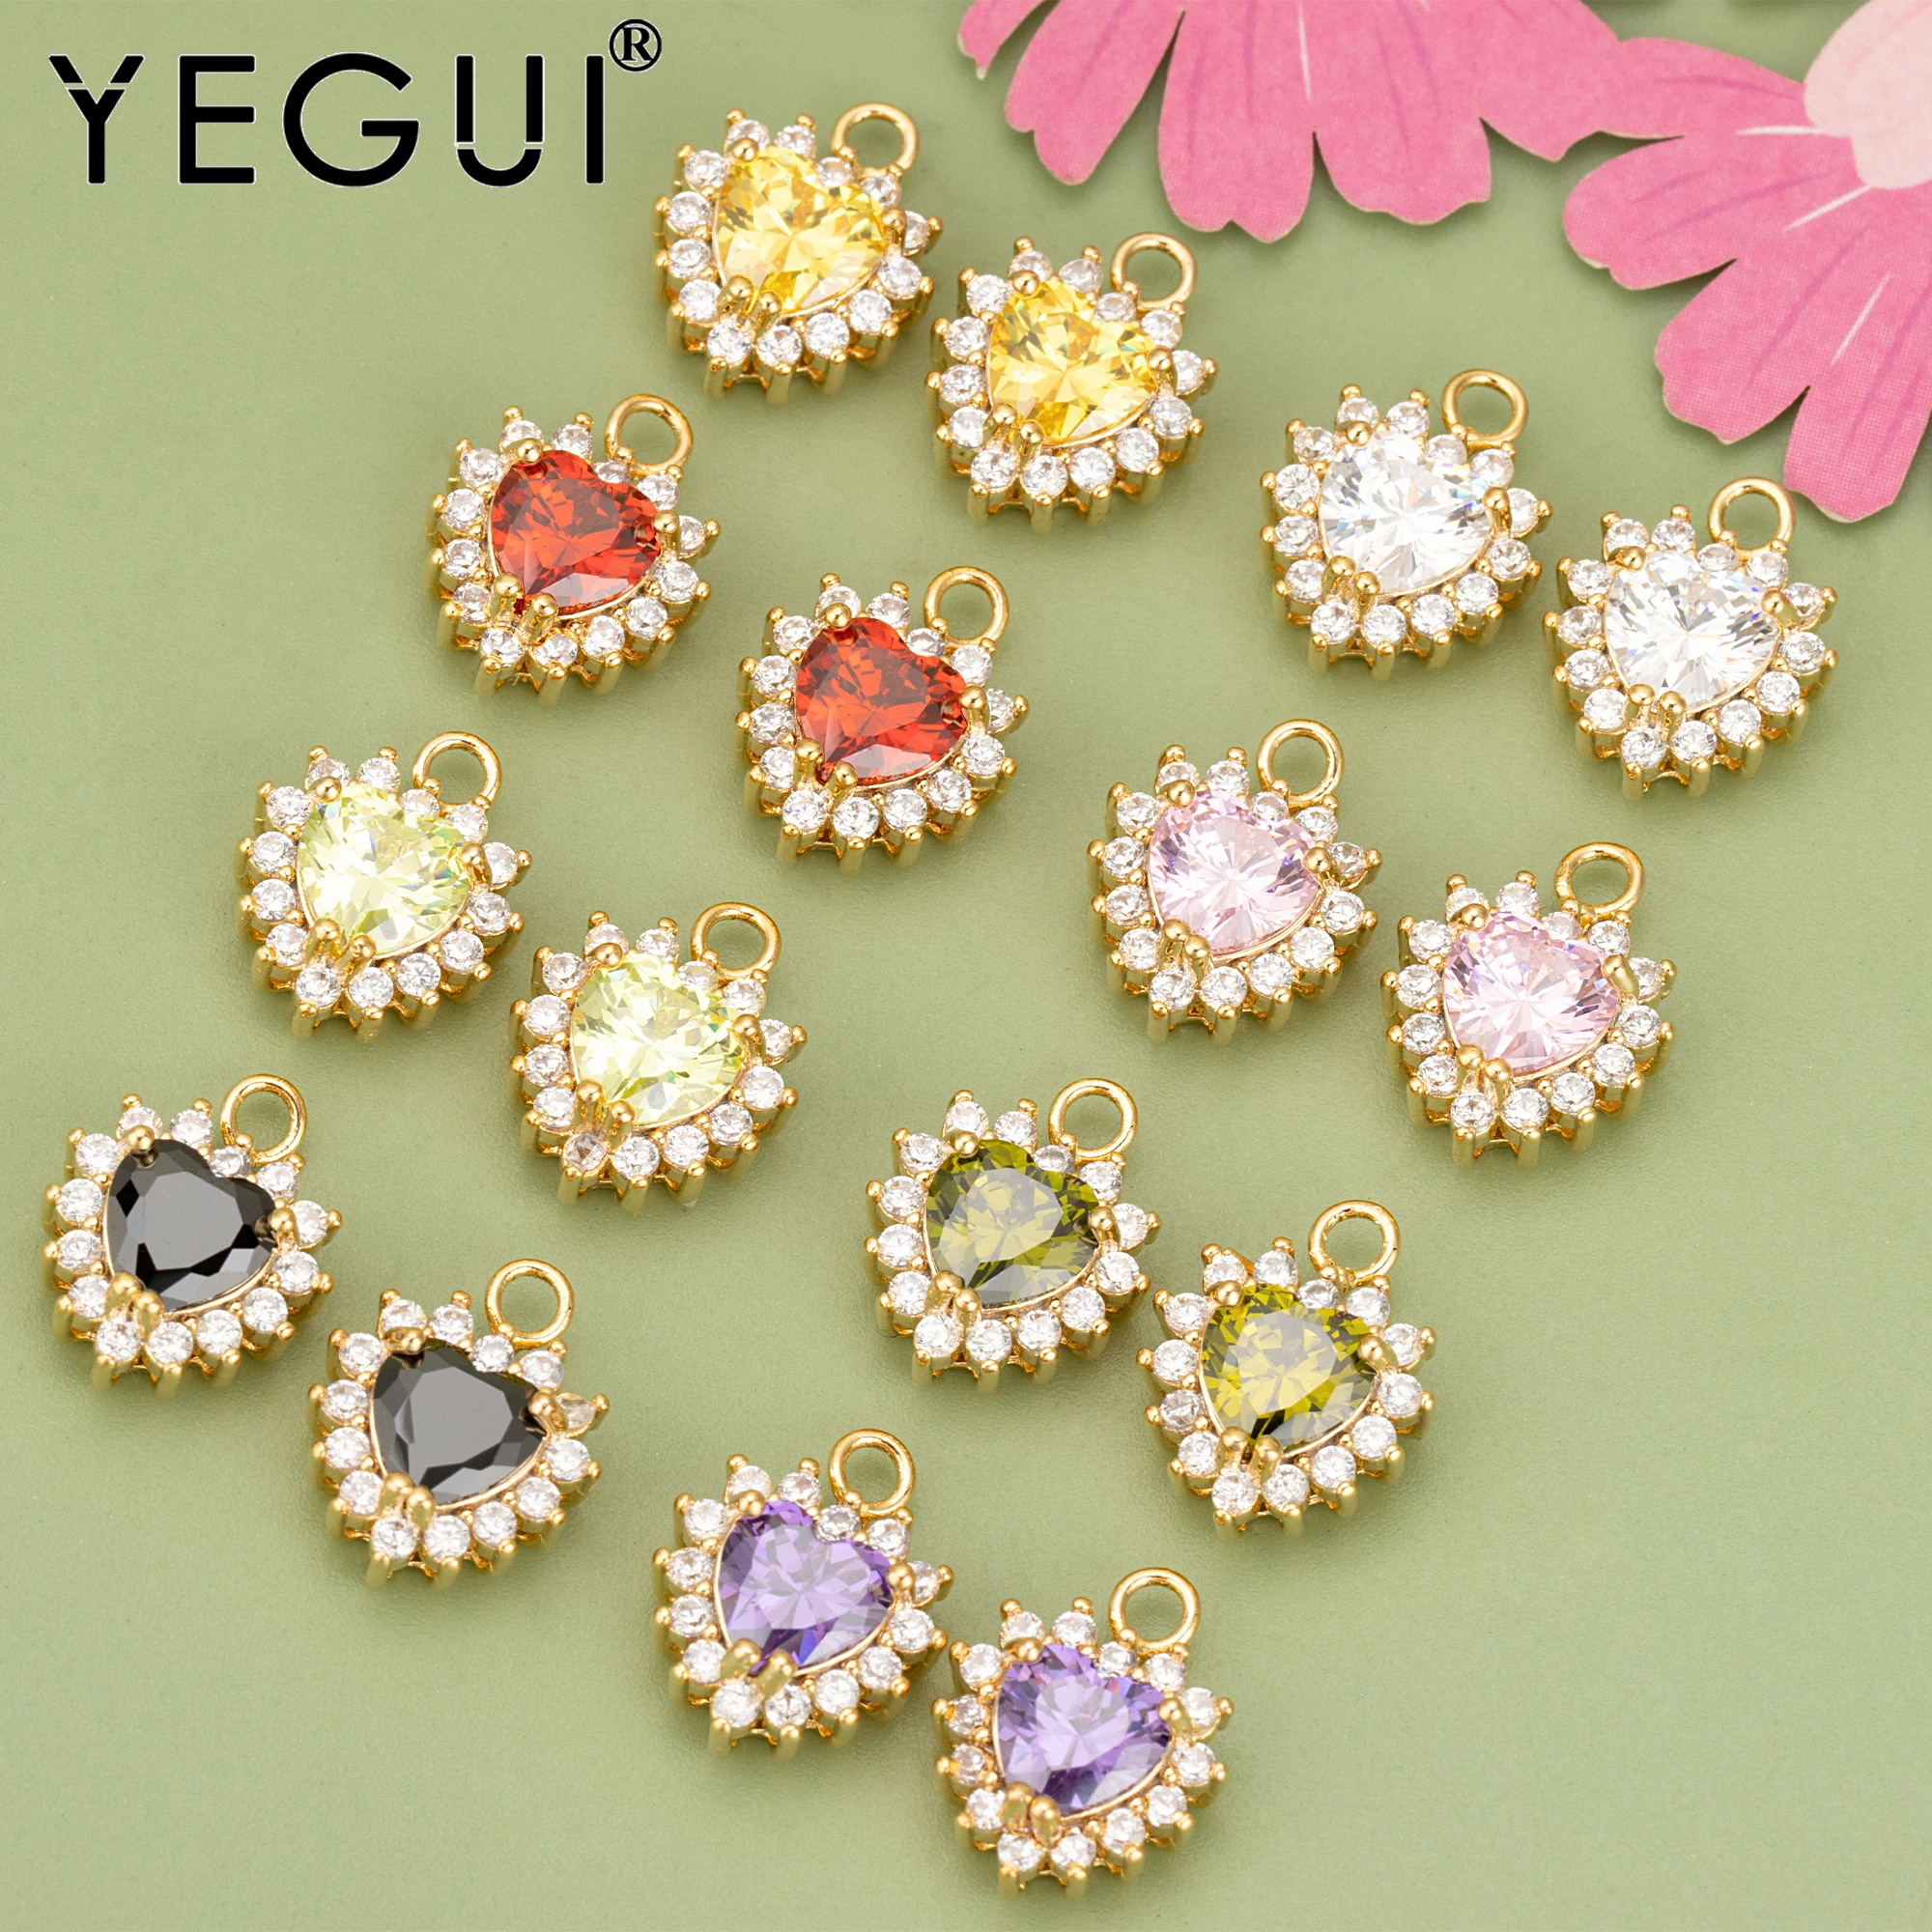 

YEGUI ME42,jewelry accessories,18k gold plated,copper,nickel free,zircons,hand made,charms,diy pendants,jewelry making,6pcs/lot